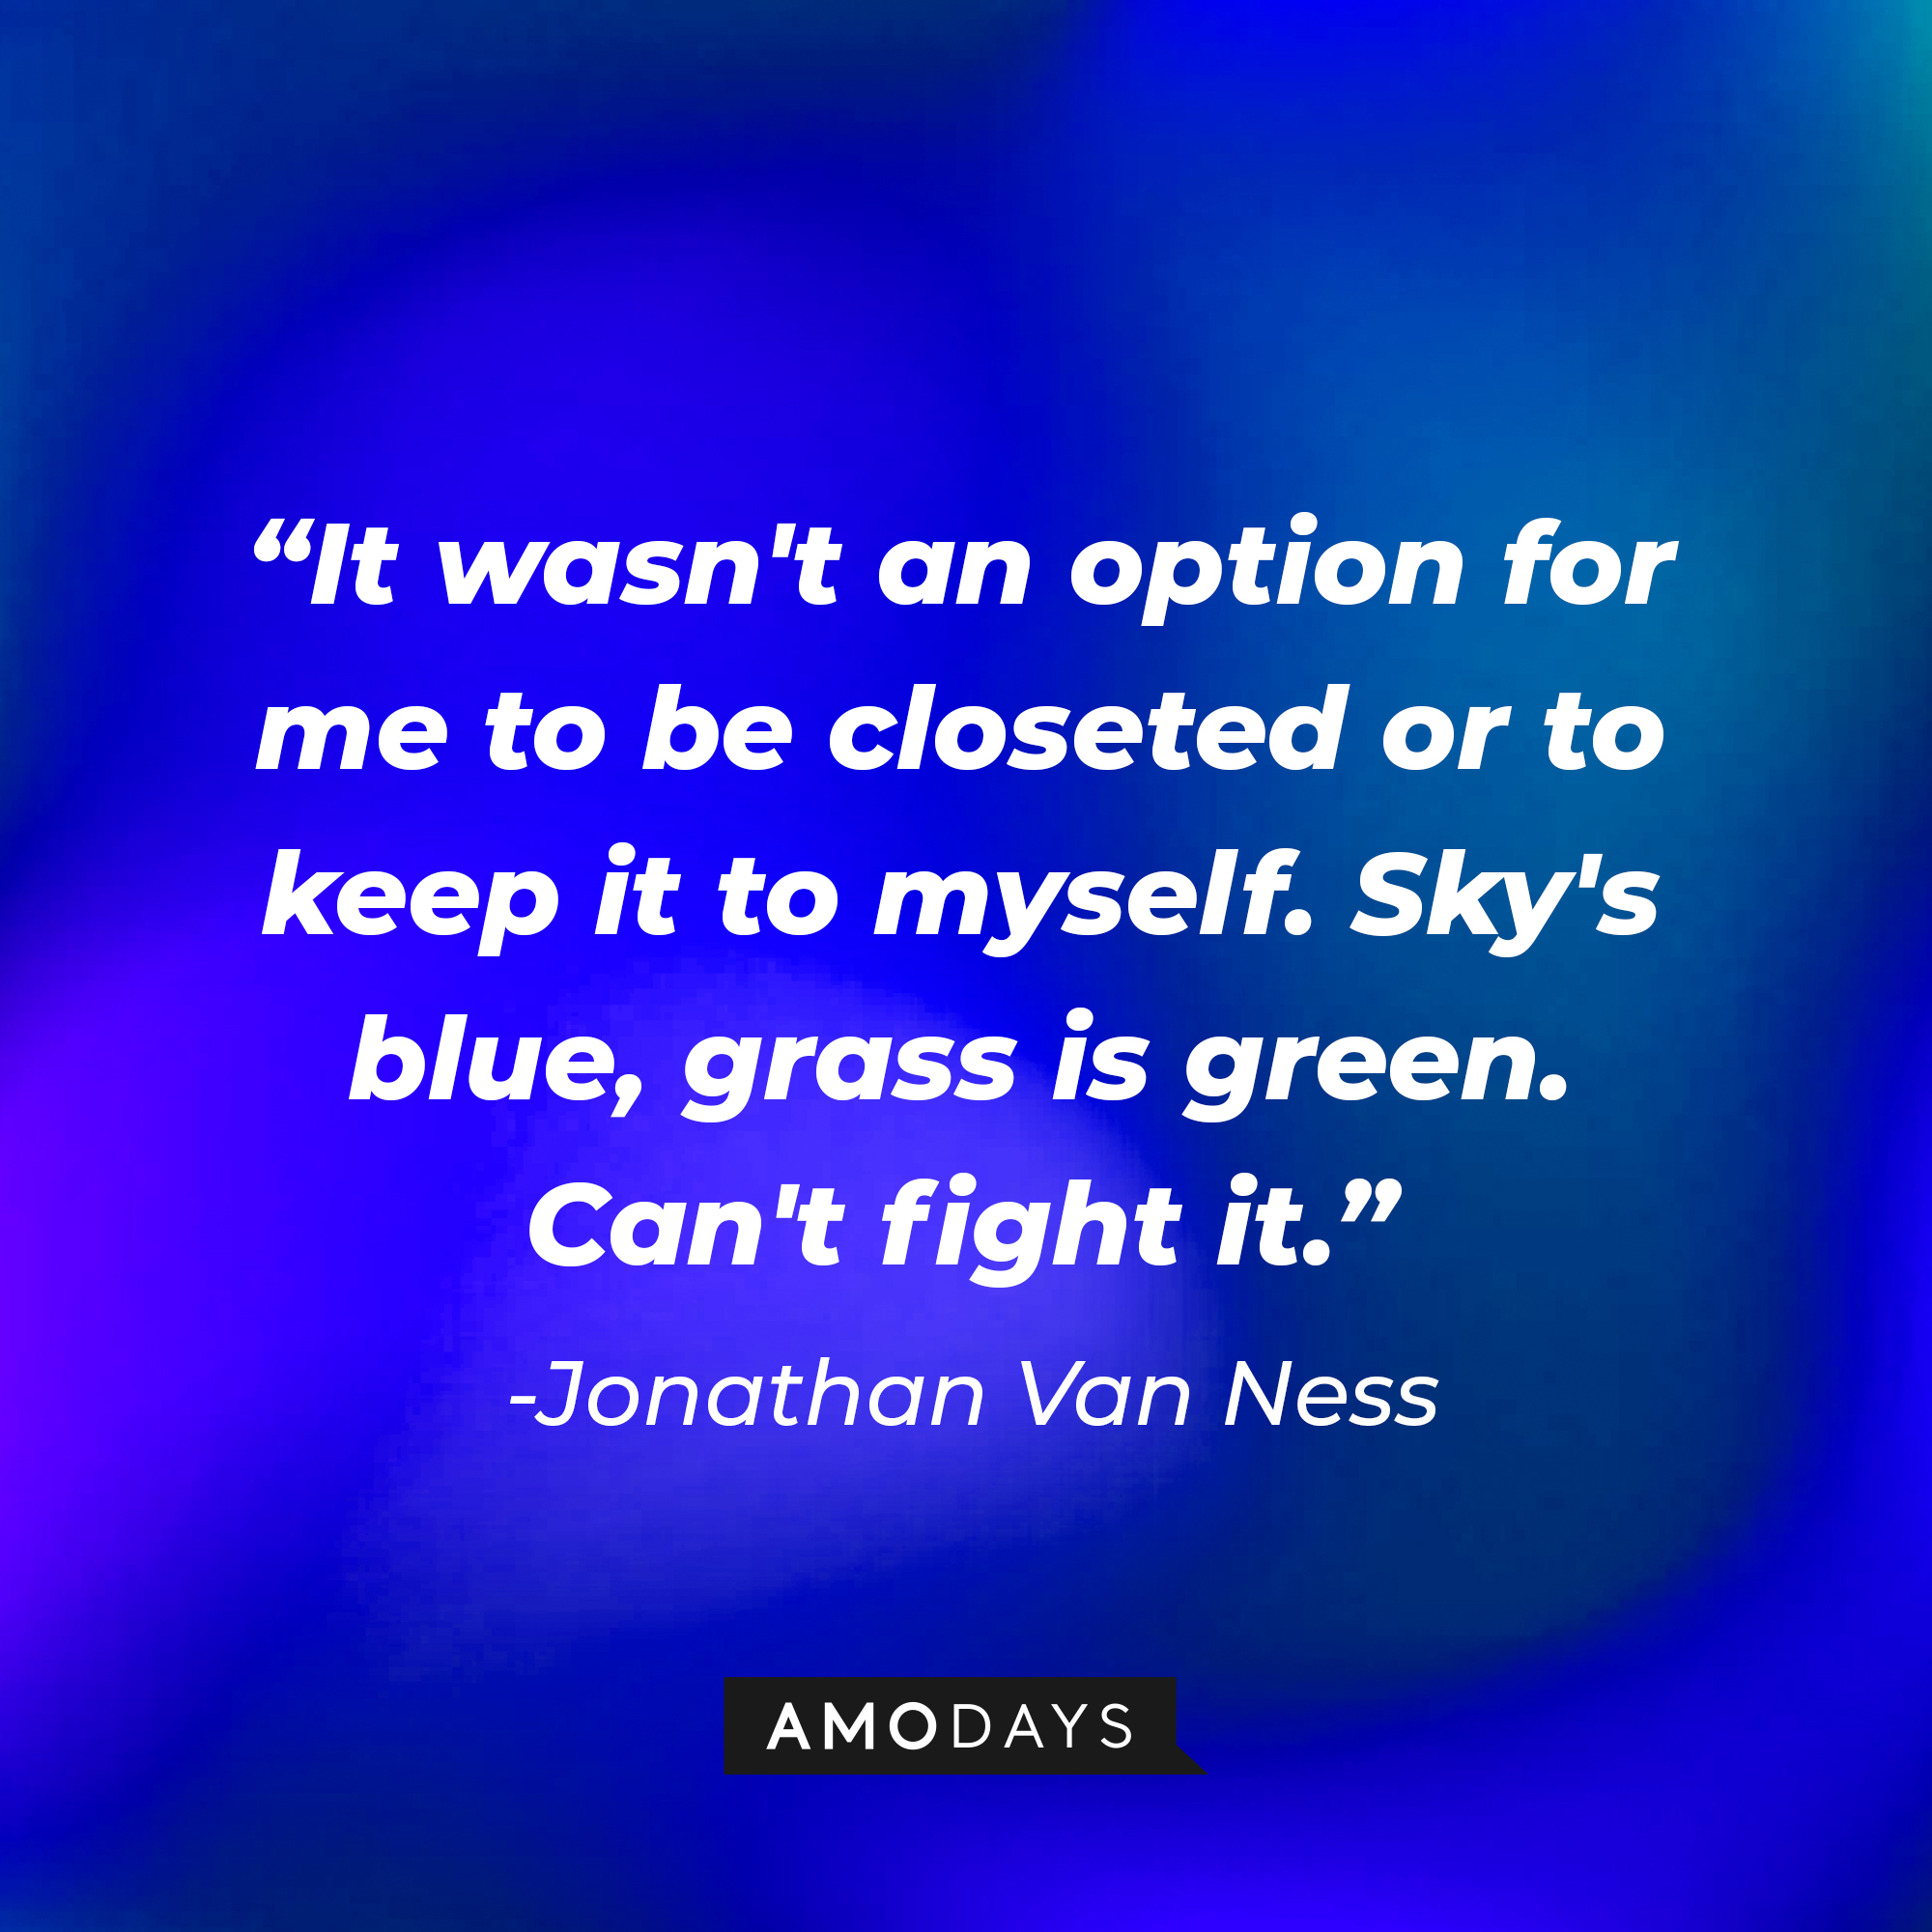 Jonathan Van Ness’ quote: "It wasn't an option for me to be closeted or to keep it to myself. Sky's blue, grass is green. Can't fight it." | Image: AmoDays